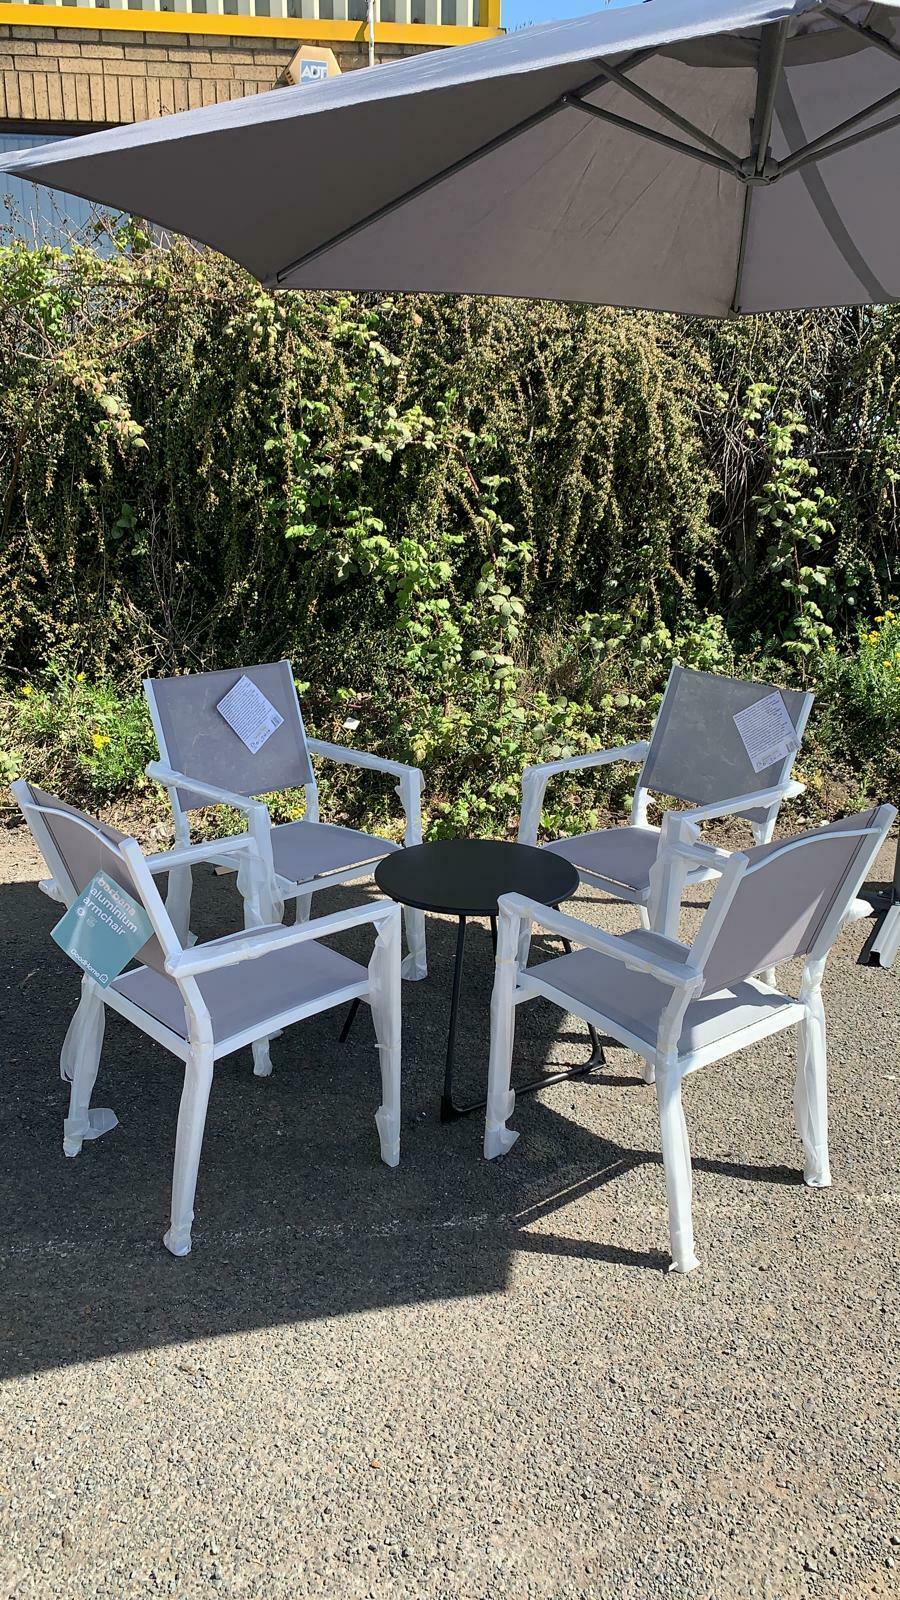 Outside Garden Furniture Set 4 Chairs and Coffee Table Set Grey - 5 Piece Garden Furniture